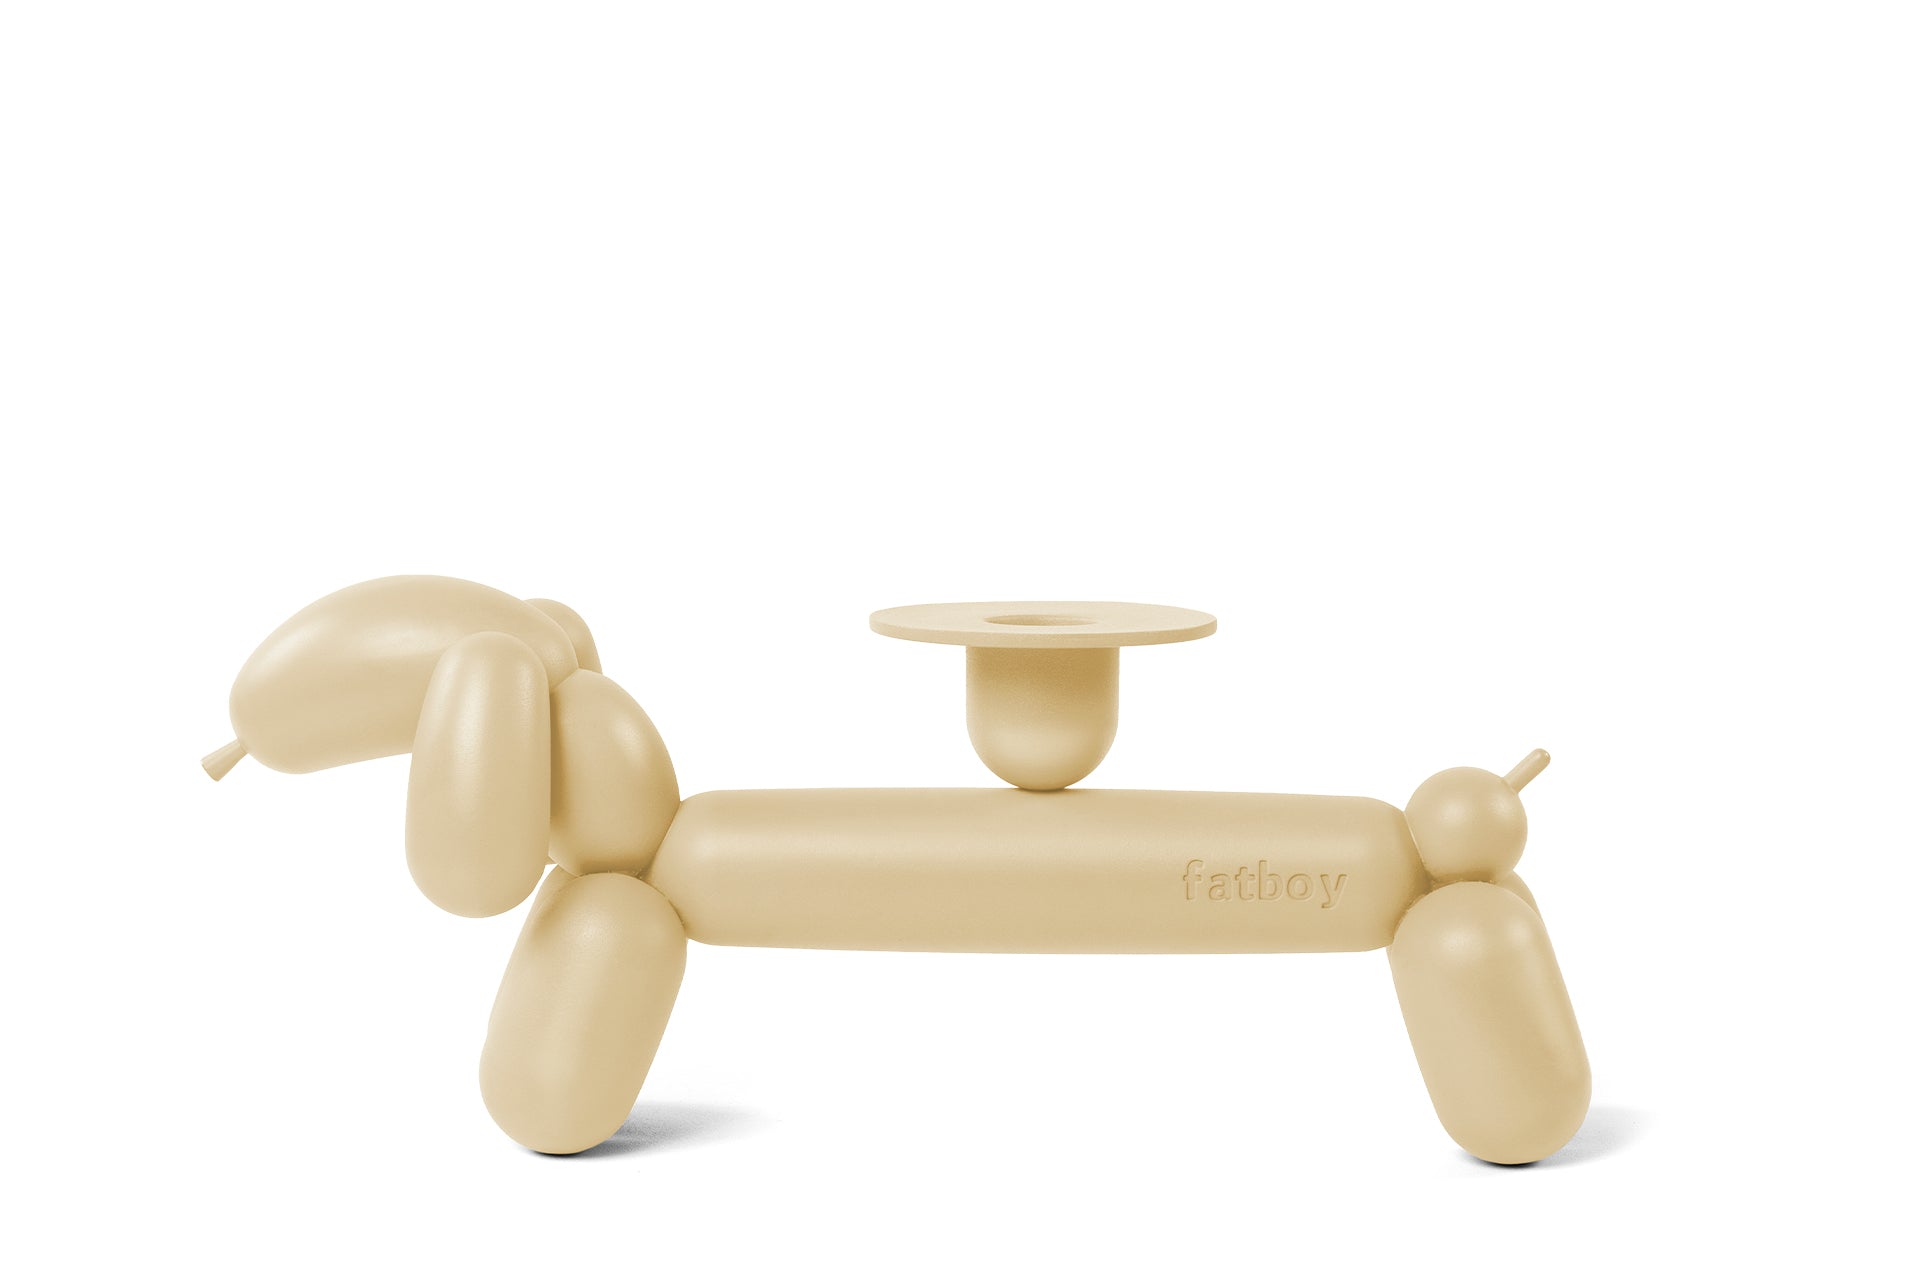 Can-Dog Candlestick